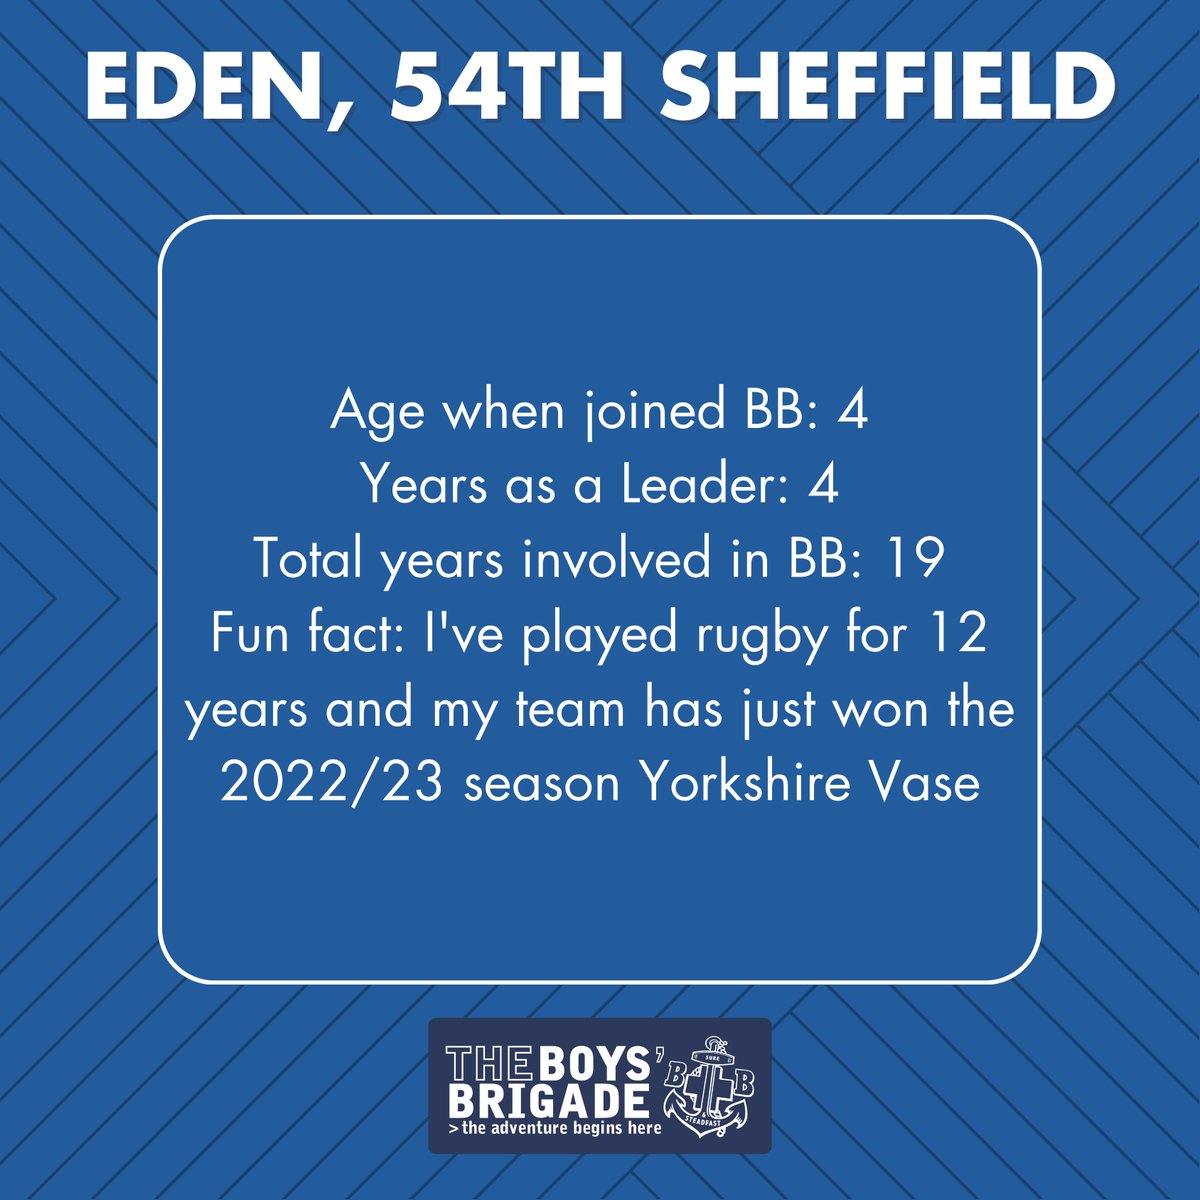 Meet Eden, who has been a dedicated member of 54th Sheffield for 19 years. From volunteering in various roles in BB to working as a PE teacher, Eden's commitment to inspiring young people extends across communities! #Lifetothefull #BoysBrigade